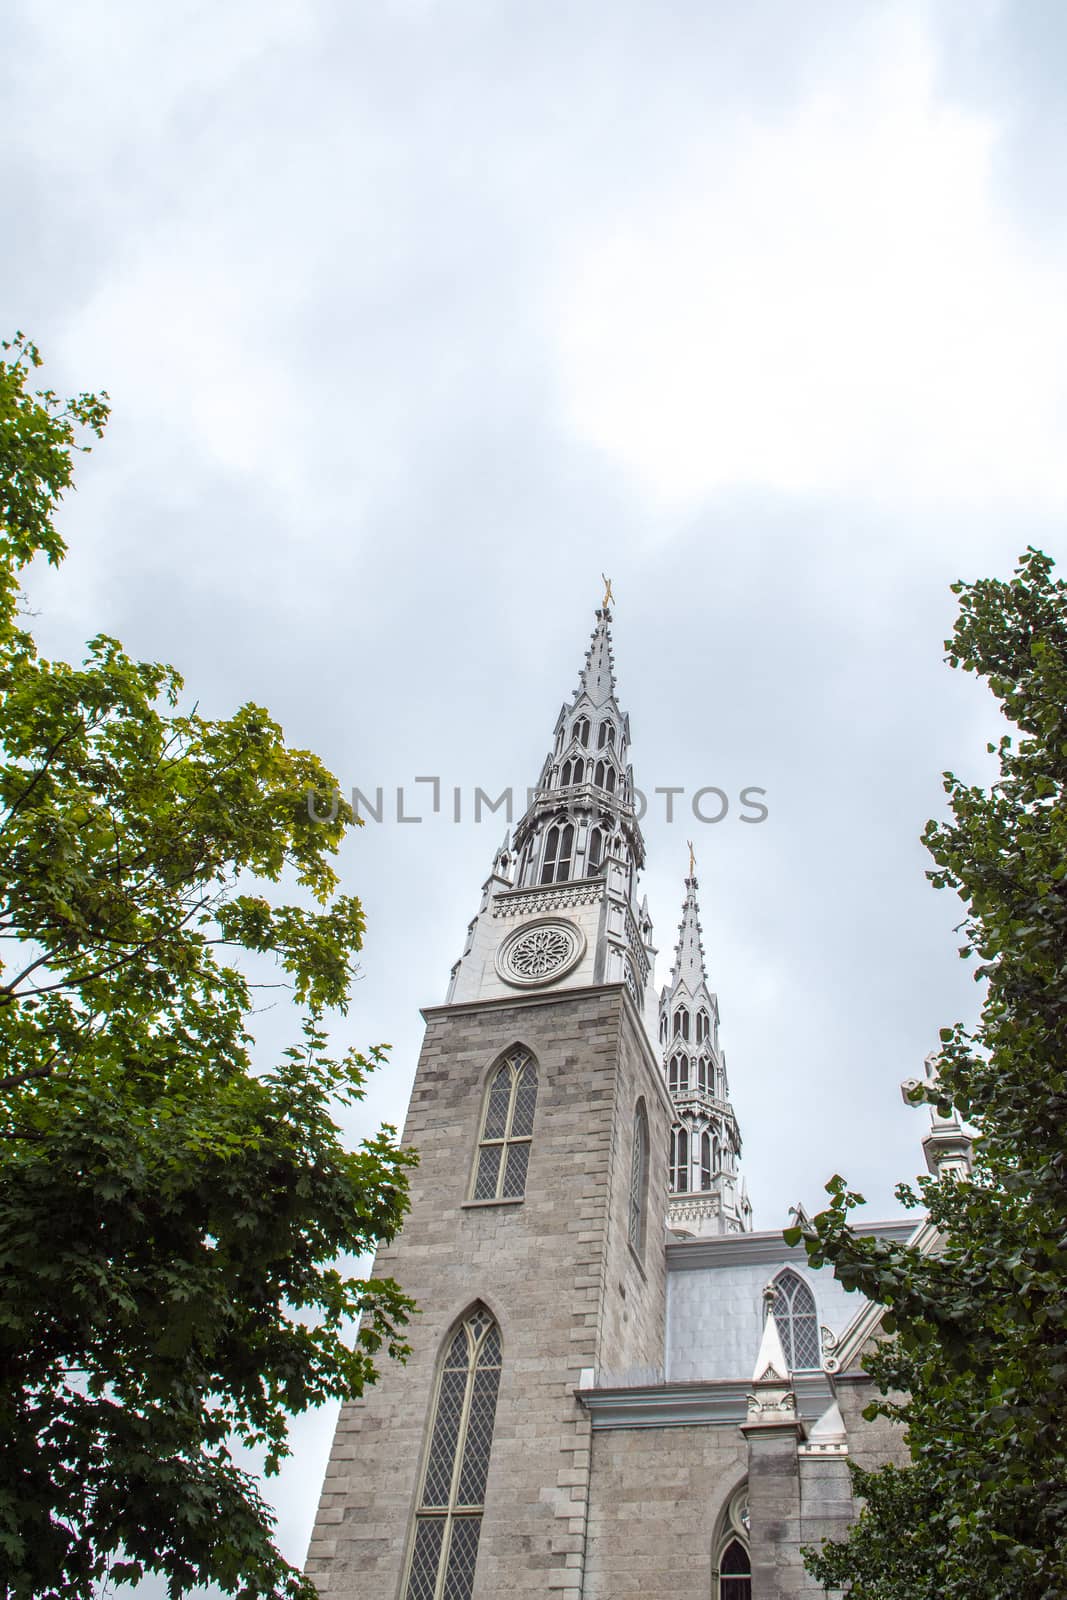 Photo, from below at an angle, of church domes through the leaves of trees against a cloudy sky